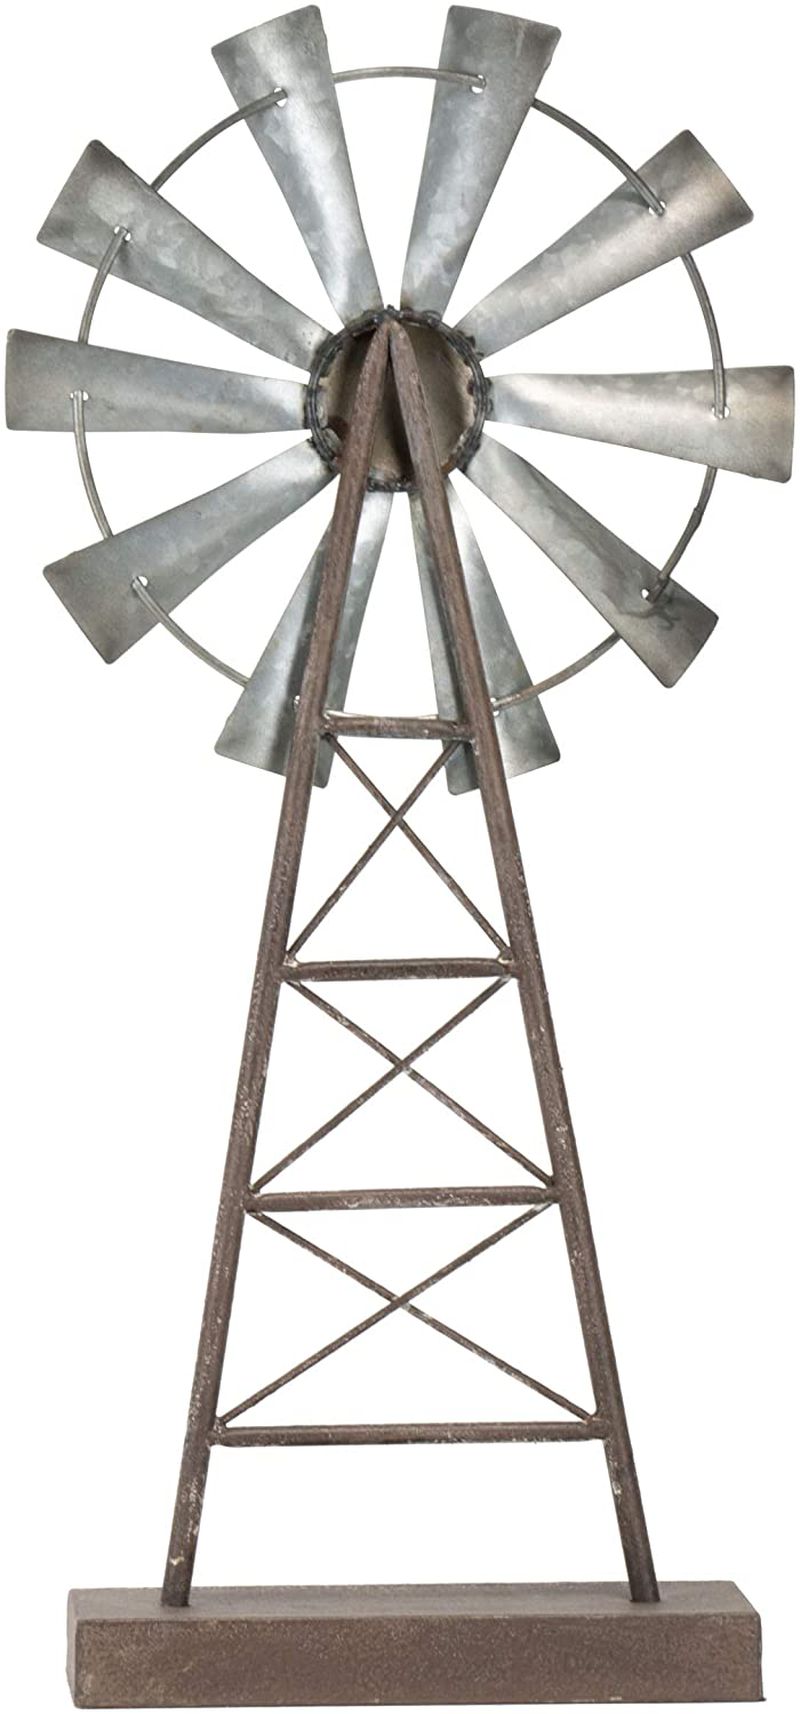 Foreside Home & Garden Metal Small Distressed Windmill Table Decor